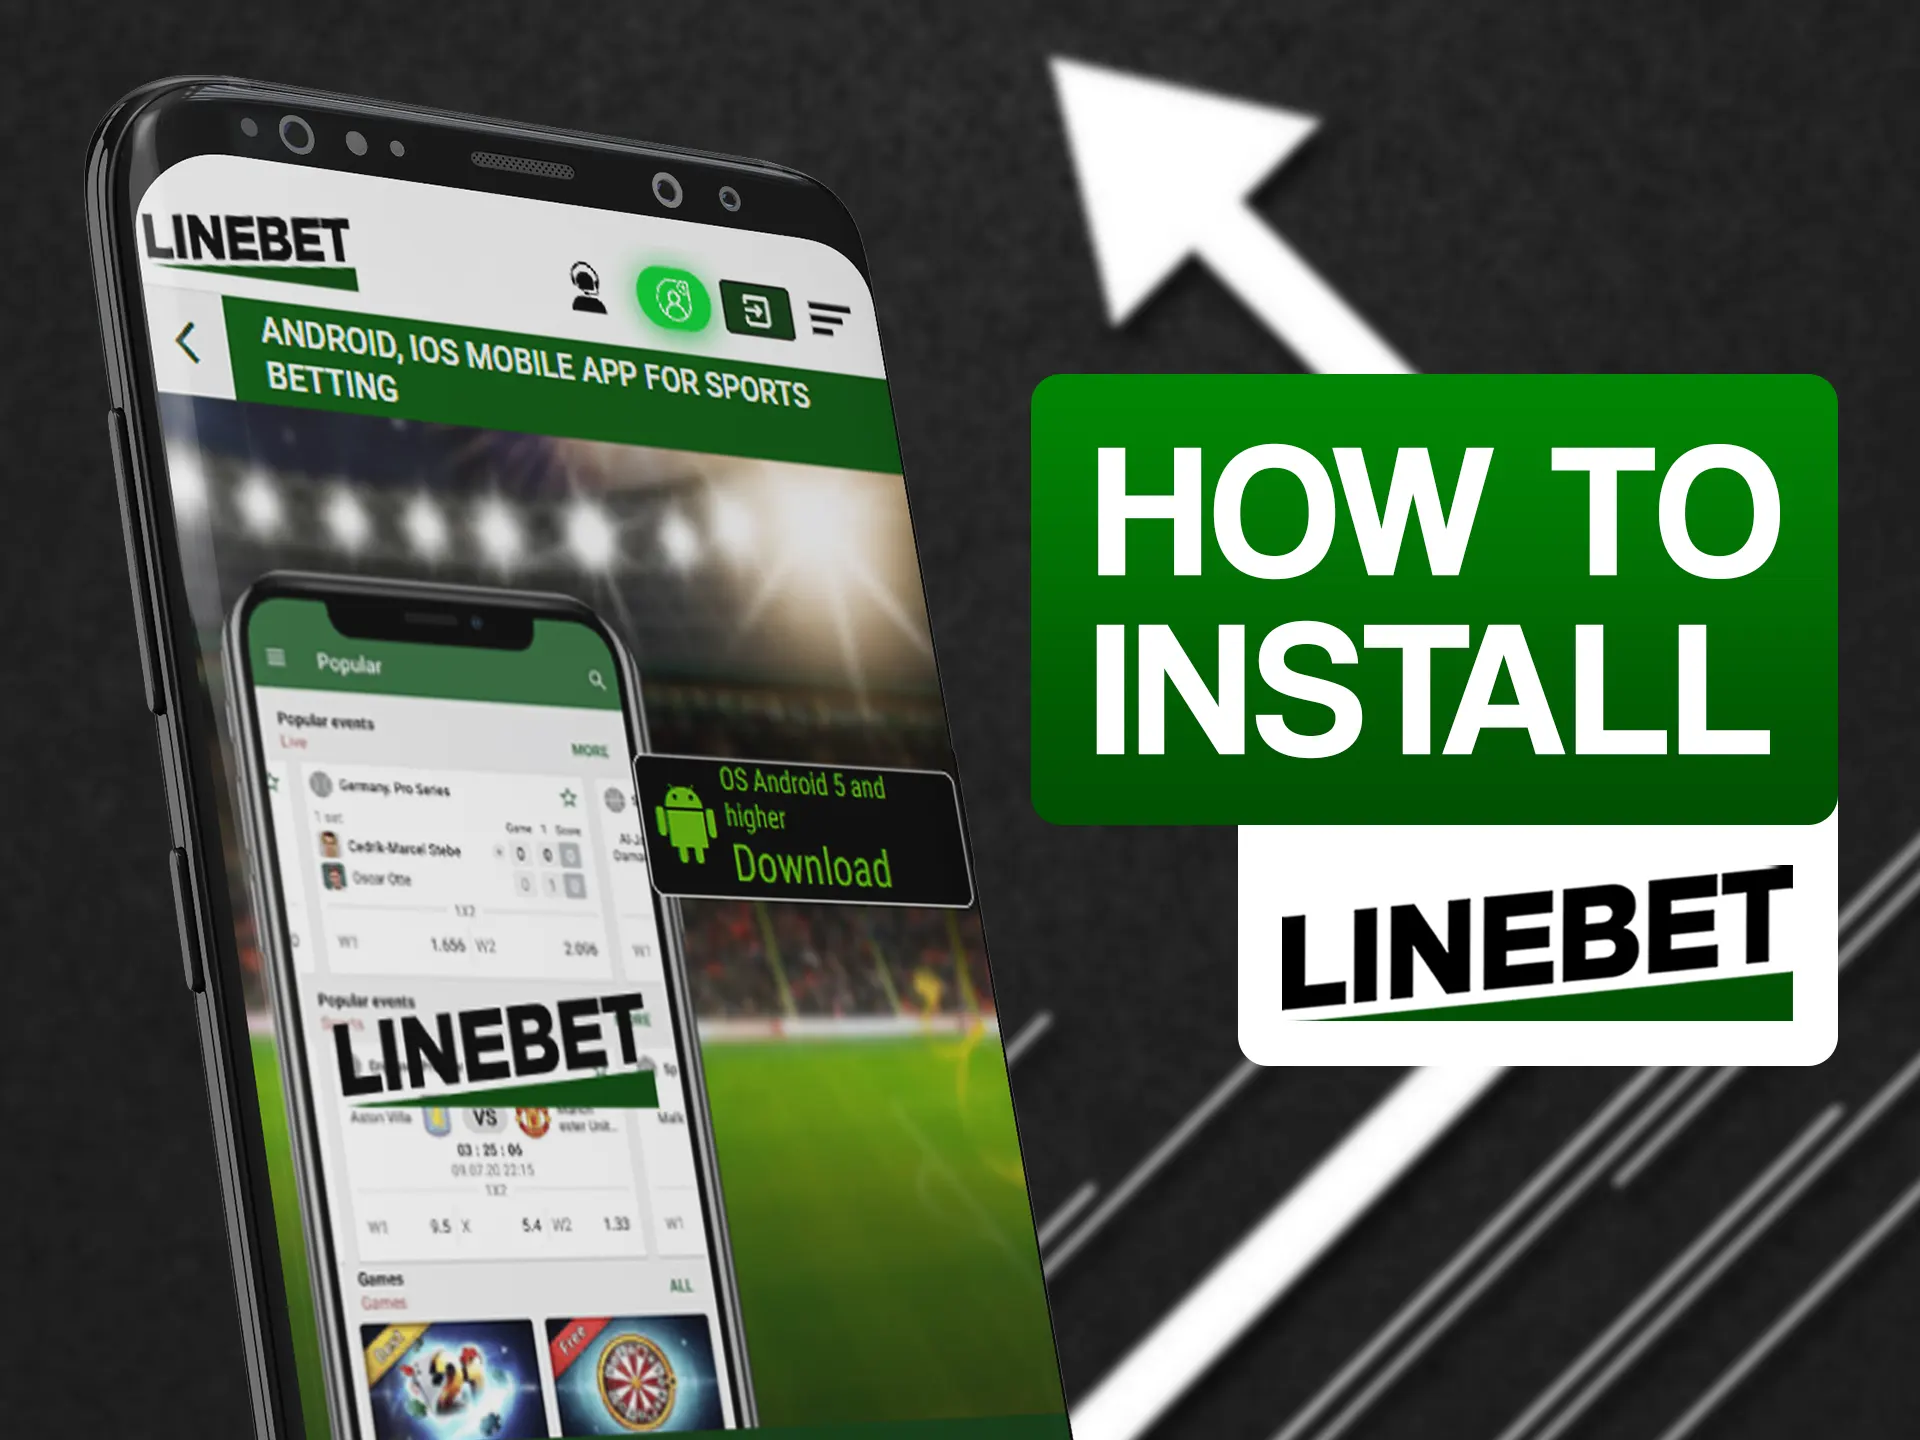 It is very easy to download and install Linebet app.